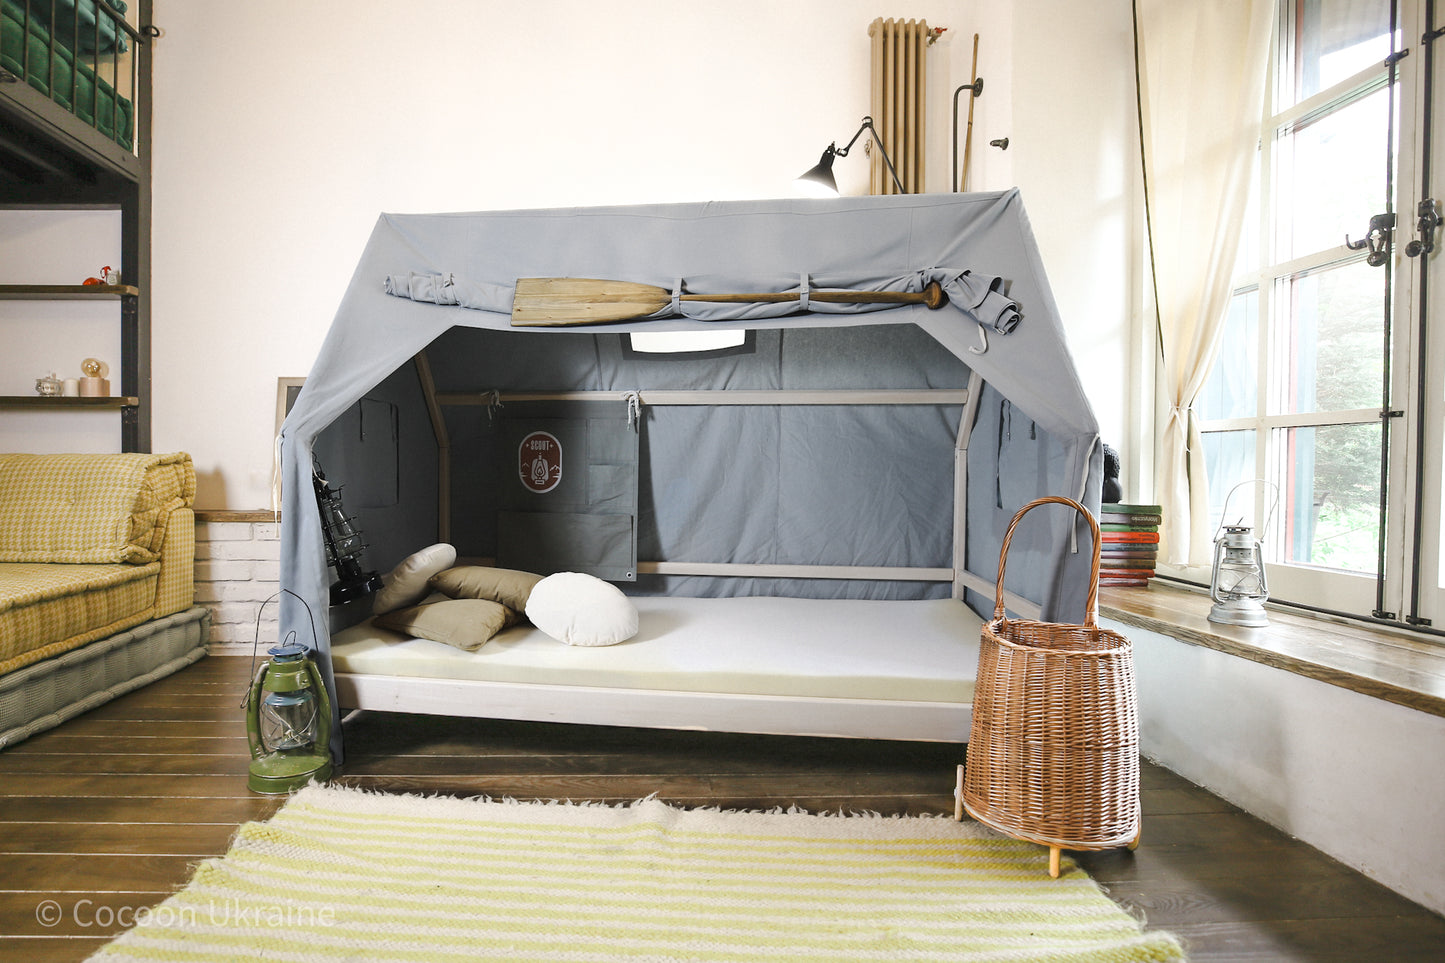 Montessori Bed with Light Gray Canopy